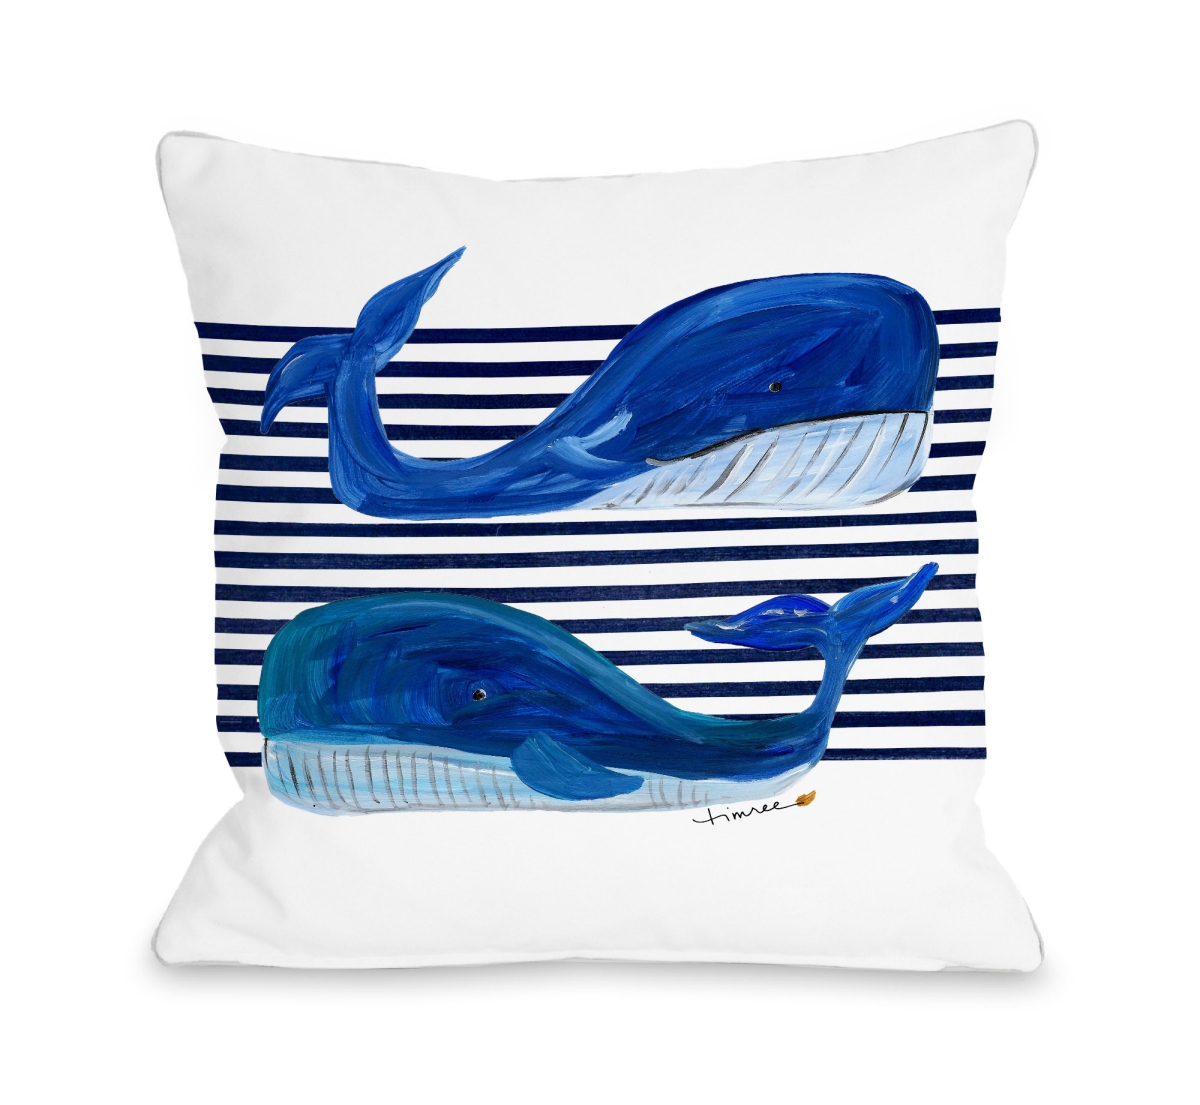 16 X 16 In. Whale Buddies Pillow By Timree, White